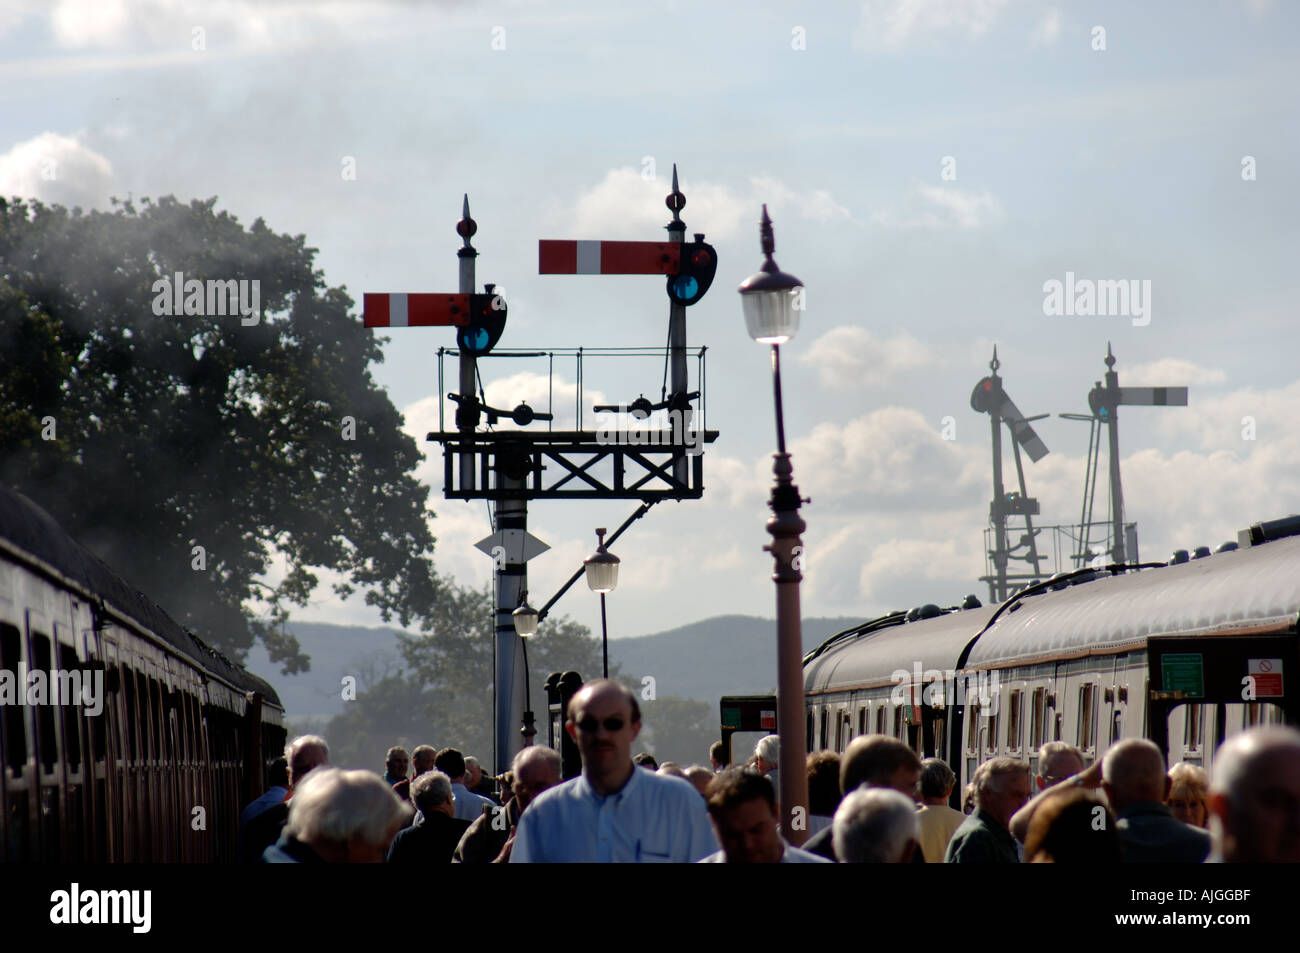 Semaphore signals at Minehead station on the west somerset railway Stock Photo